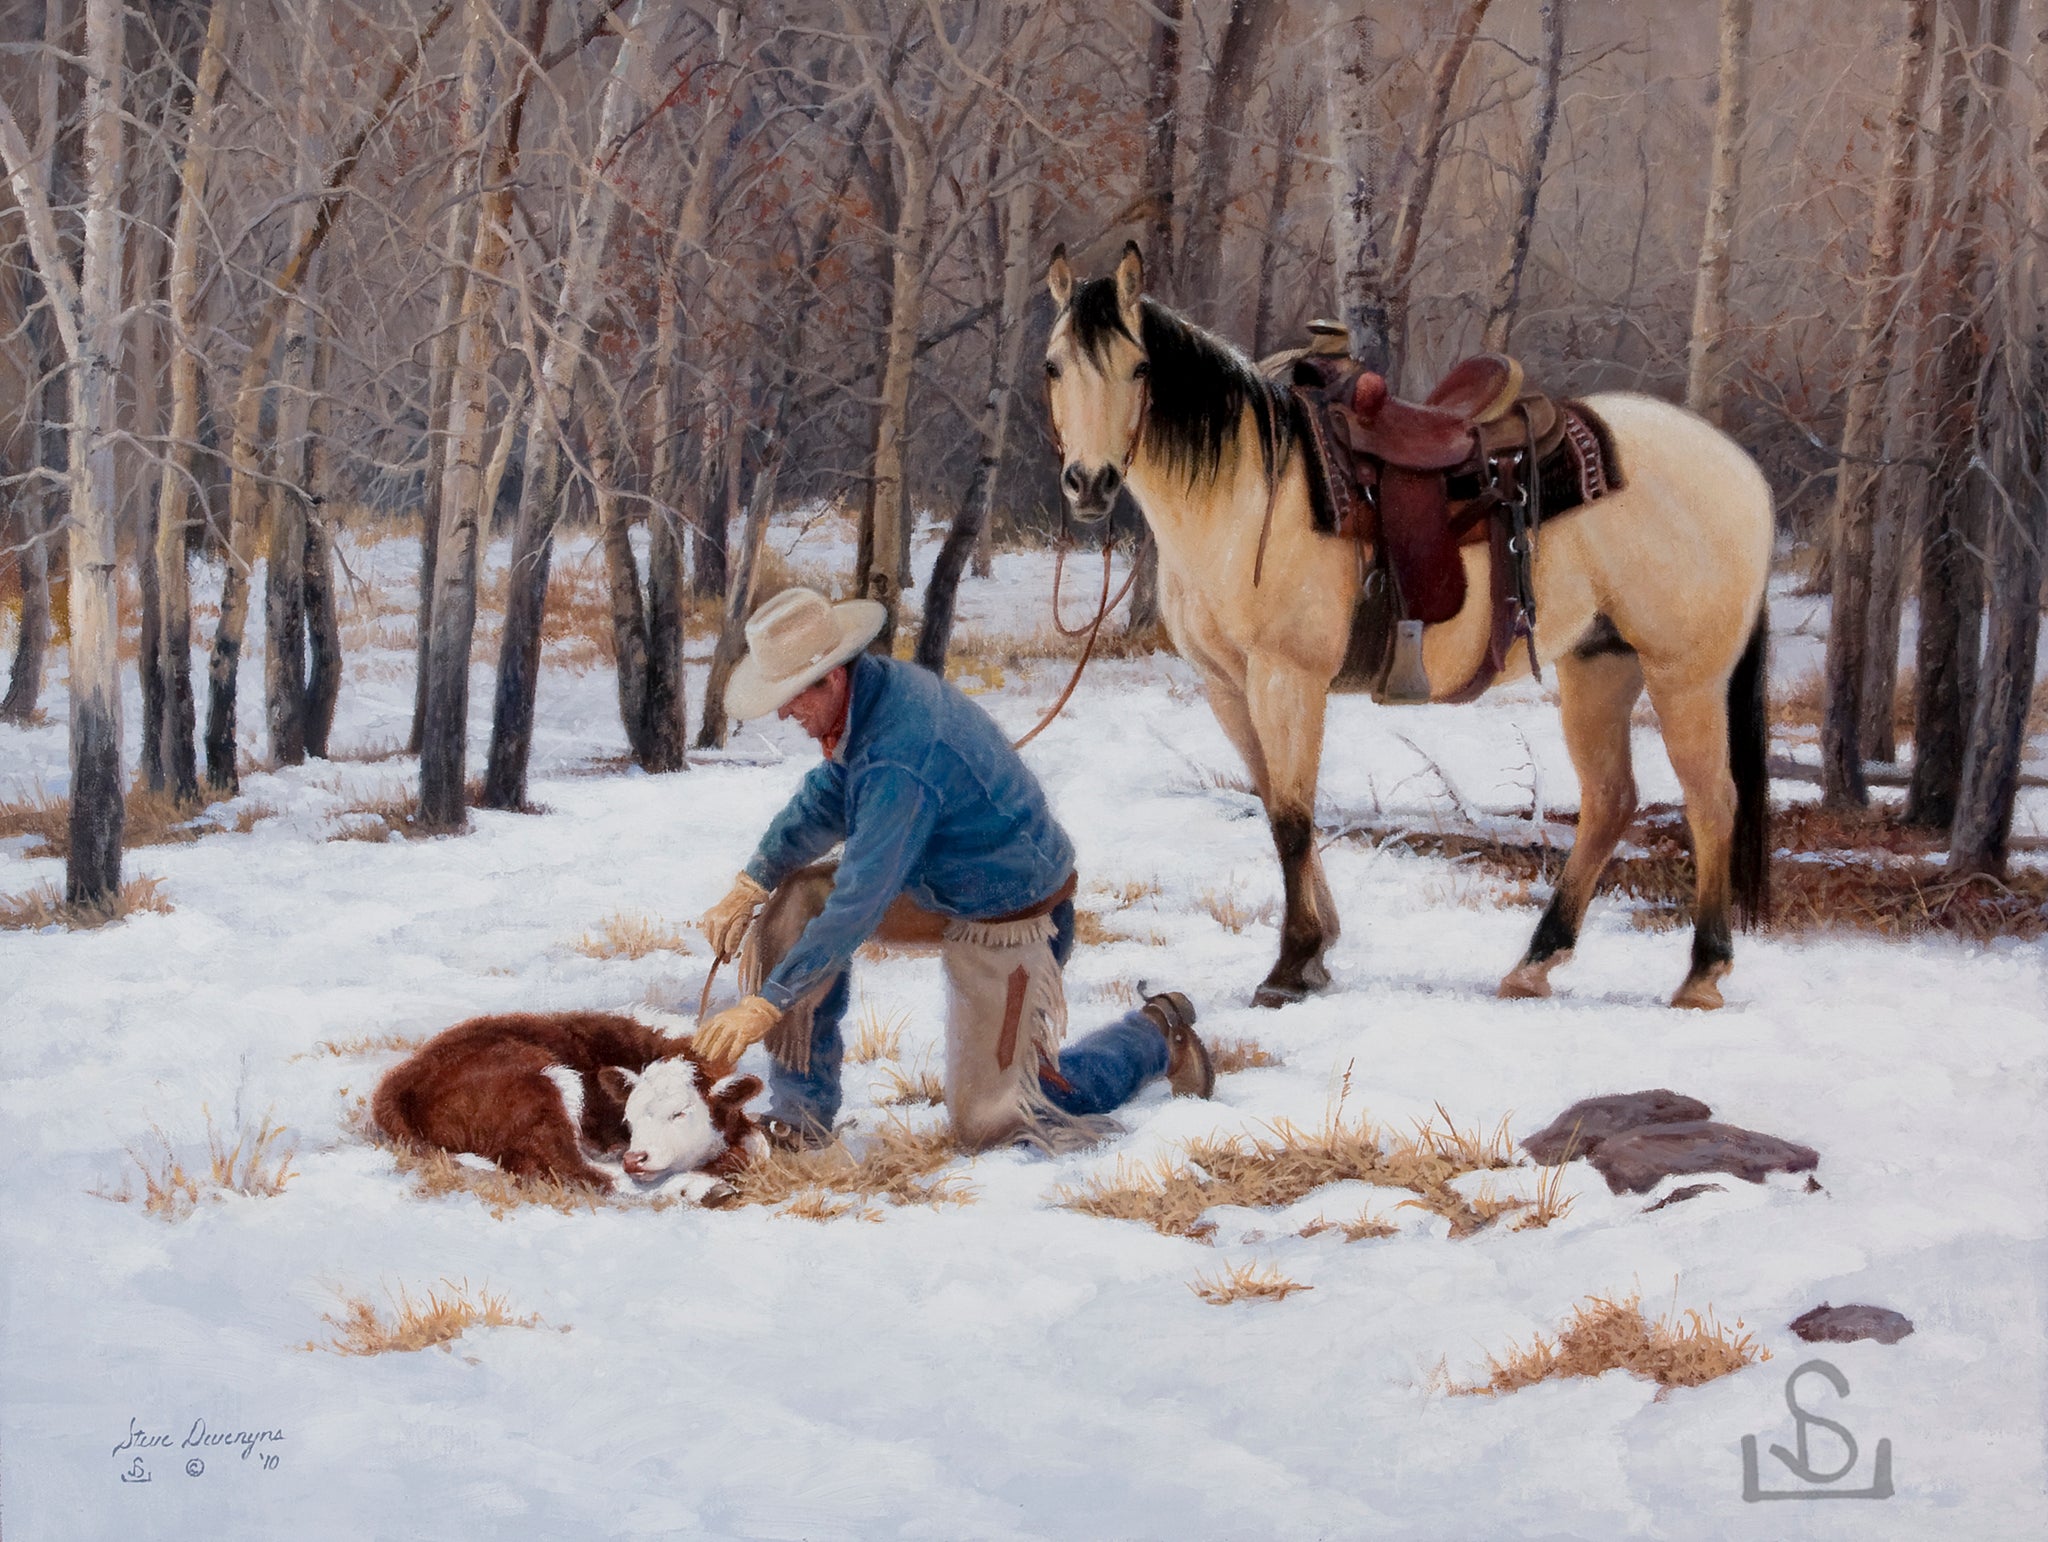 Wake Up Call by Steve Devenyns.  His paintings are of Ranching, Wildlife and Cowboy scenes. Steve Devenyns Fine Art and Limited Edition Prints, Giclee’s and Original Paintings of Wyoming Wilderness, Outfitters, Mules, pack strings, working cowboys and cattle.